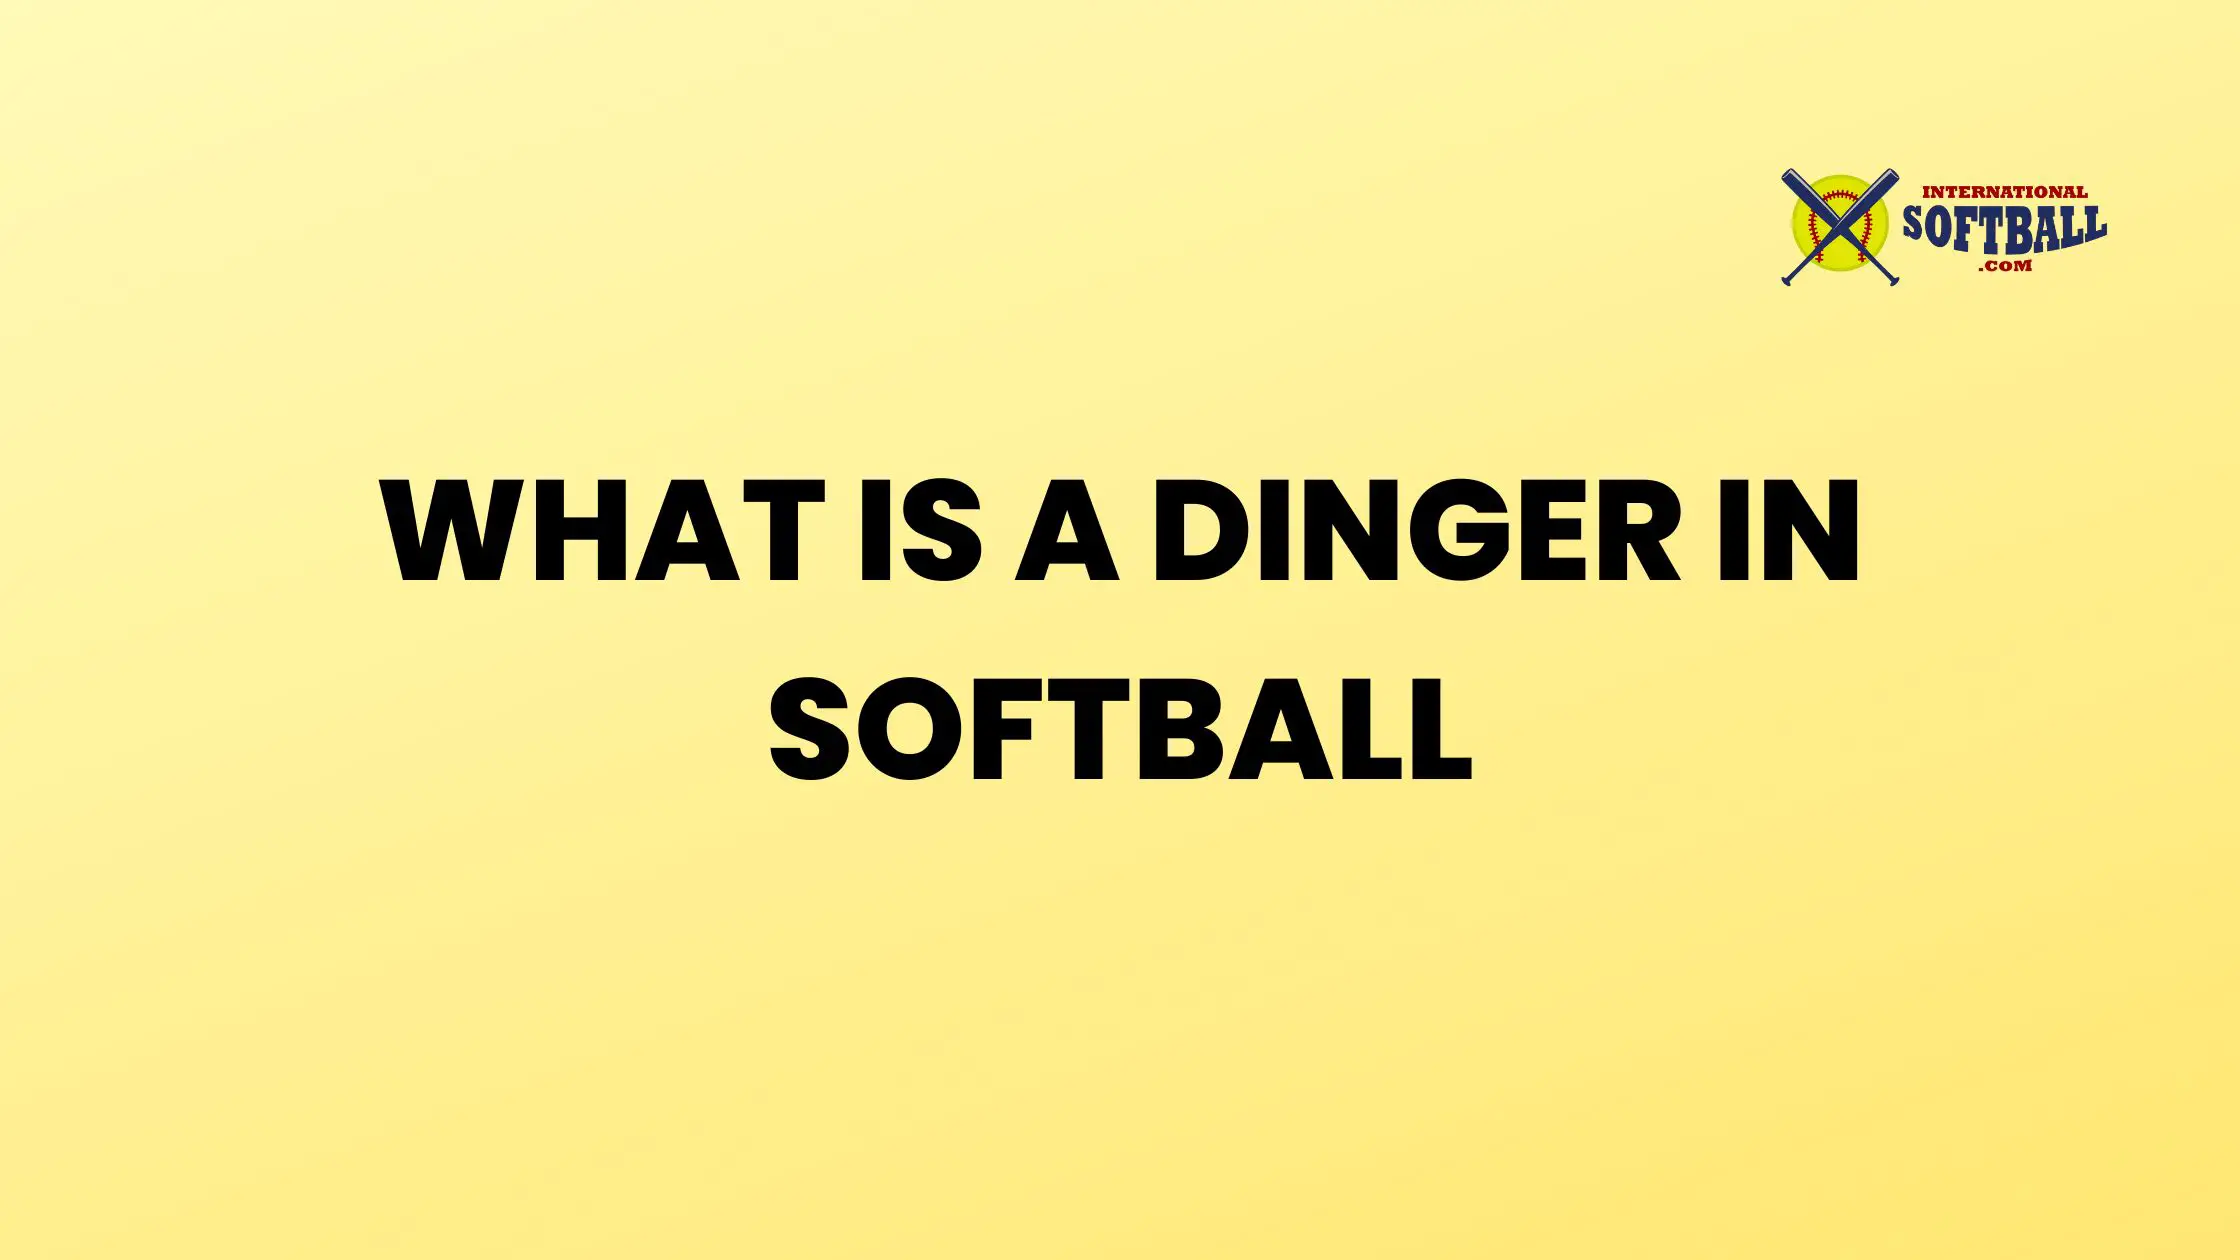 WHAT IS A DINGER IN SOFTBALL